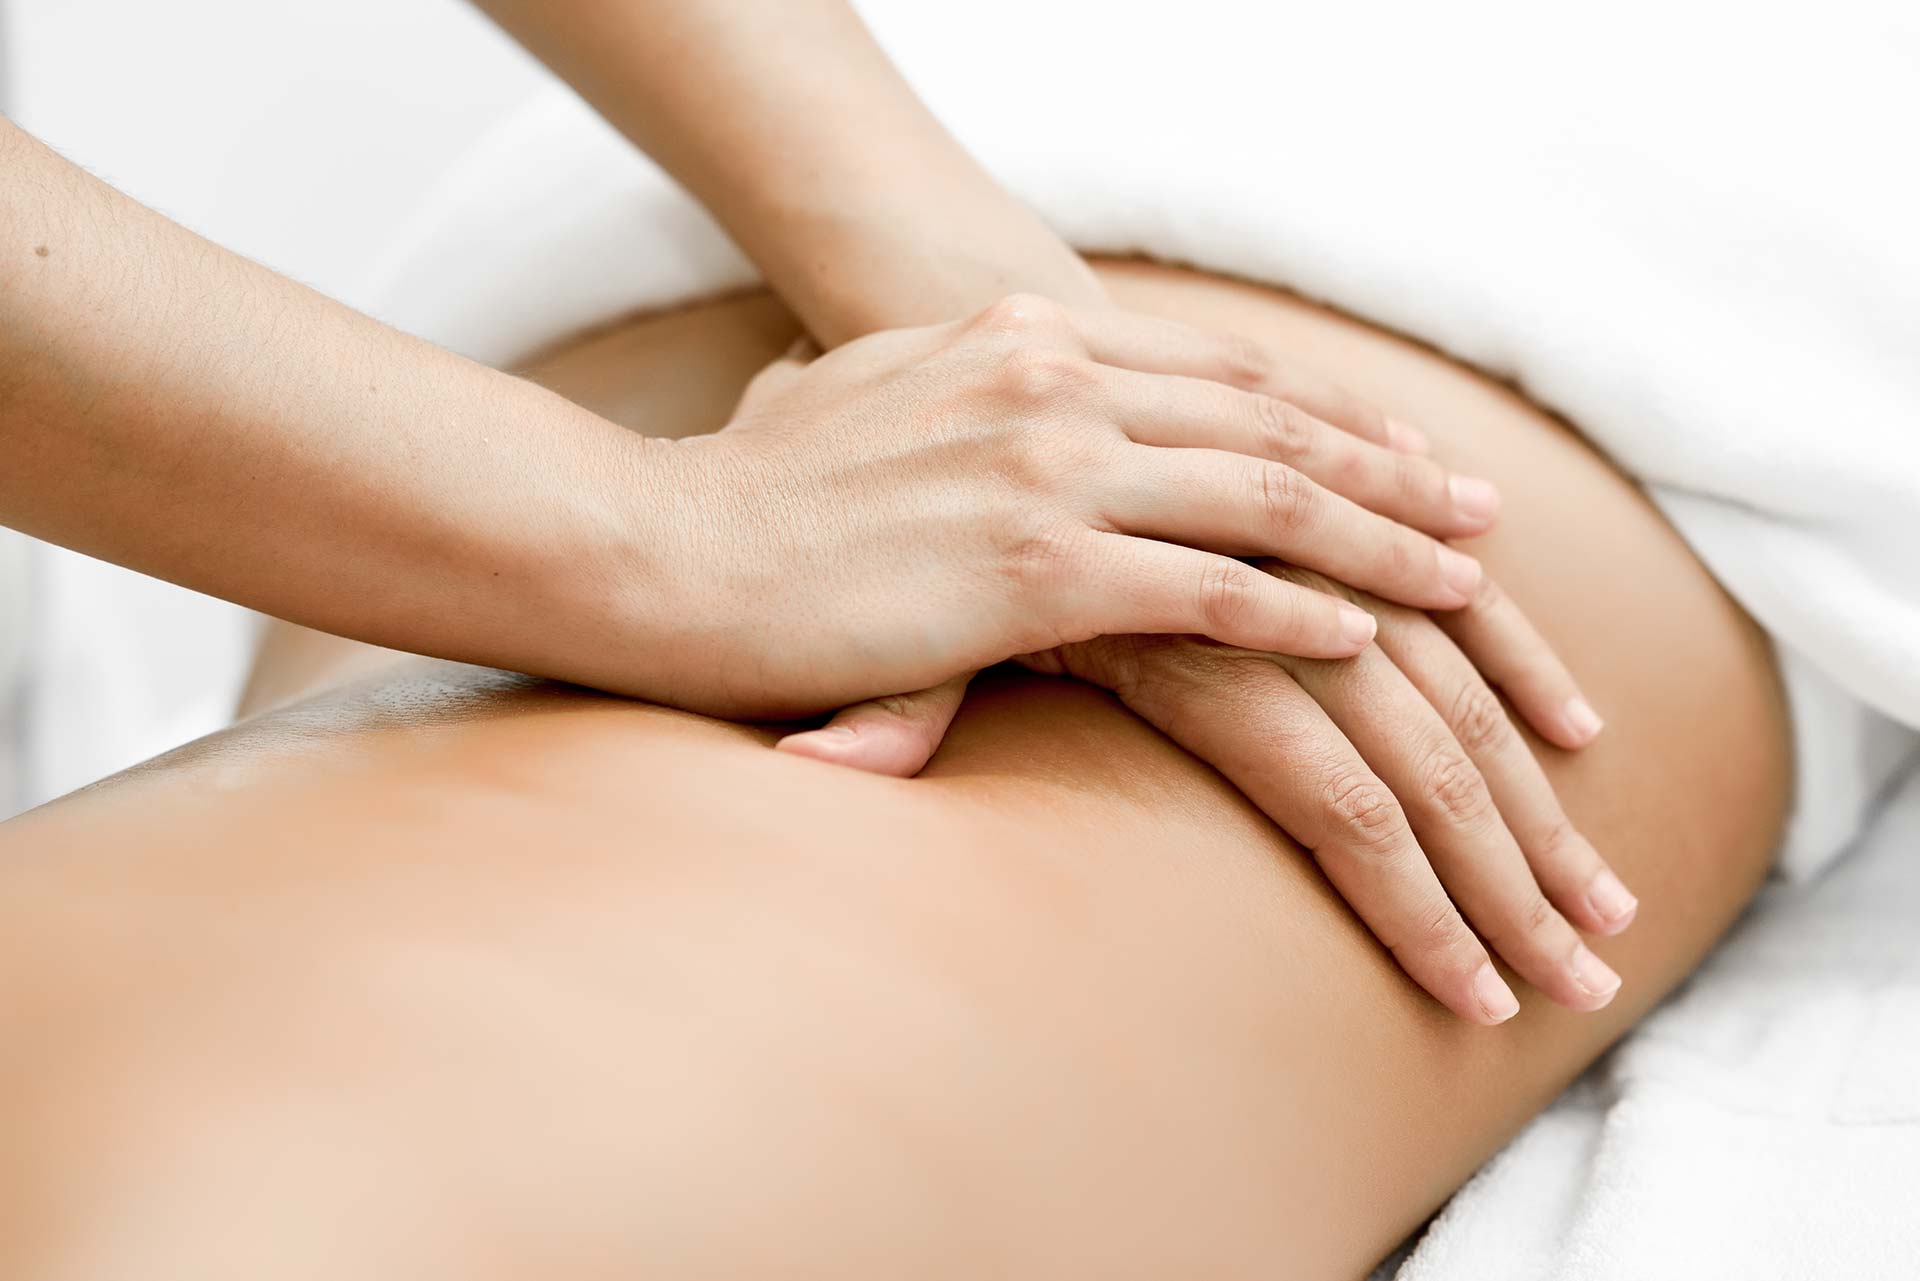 Massage therapy treatment being carried out